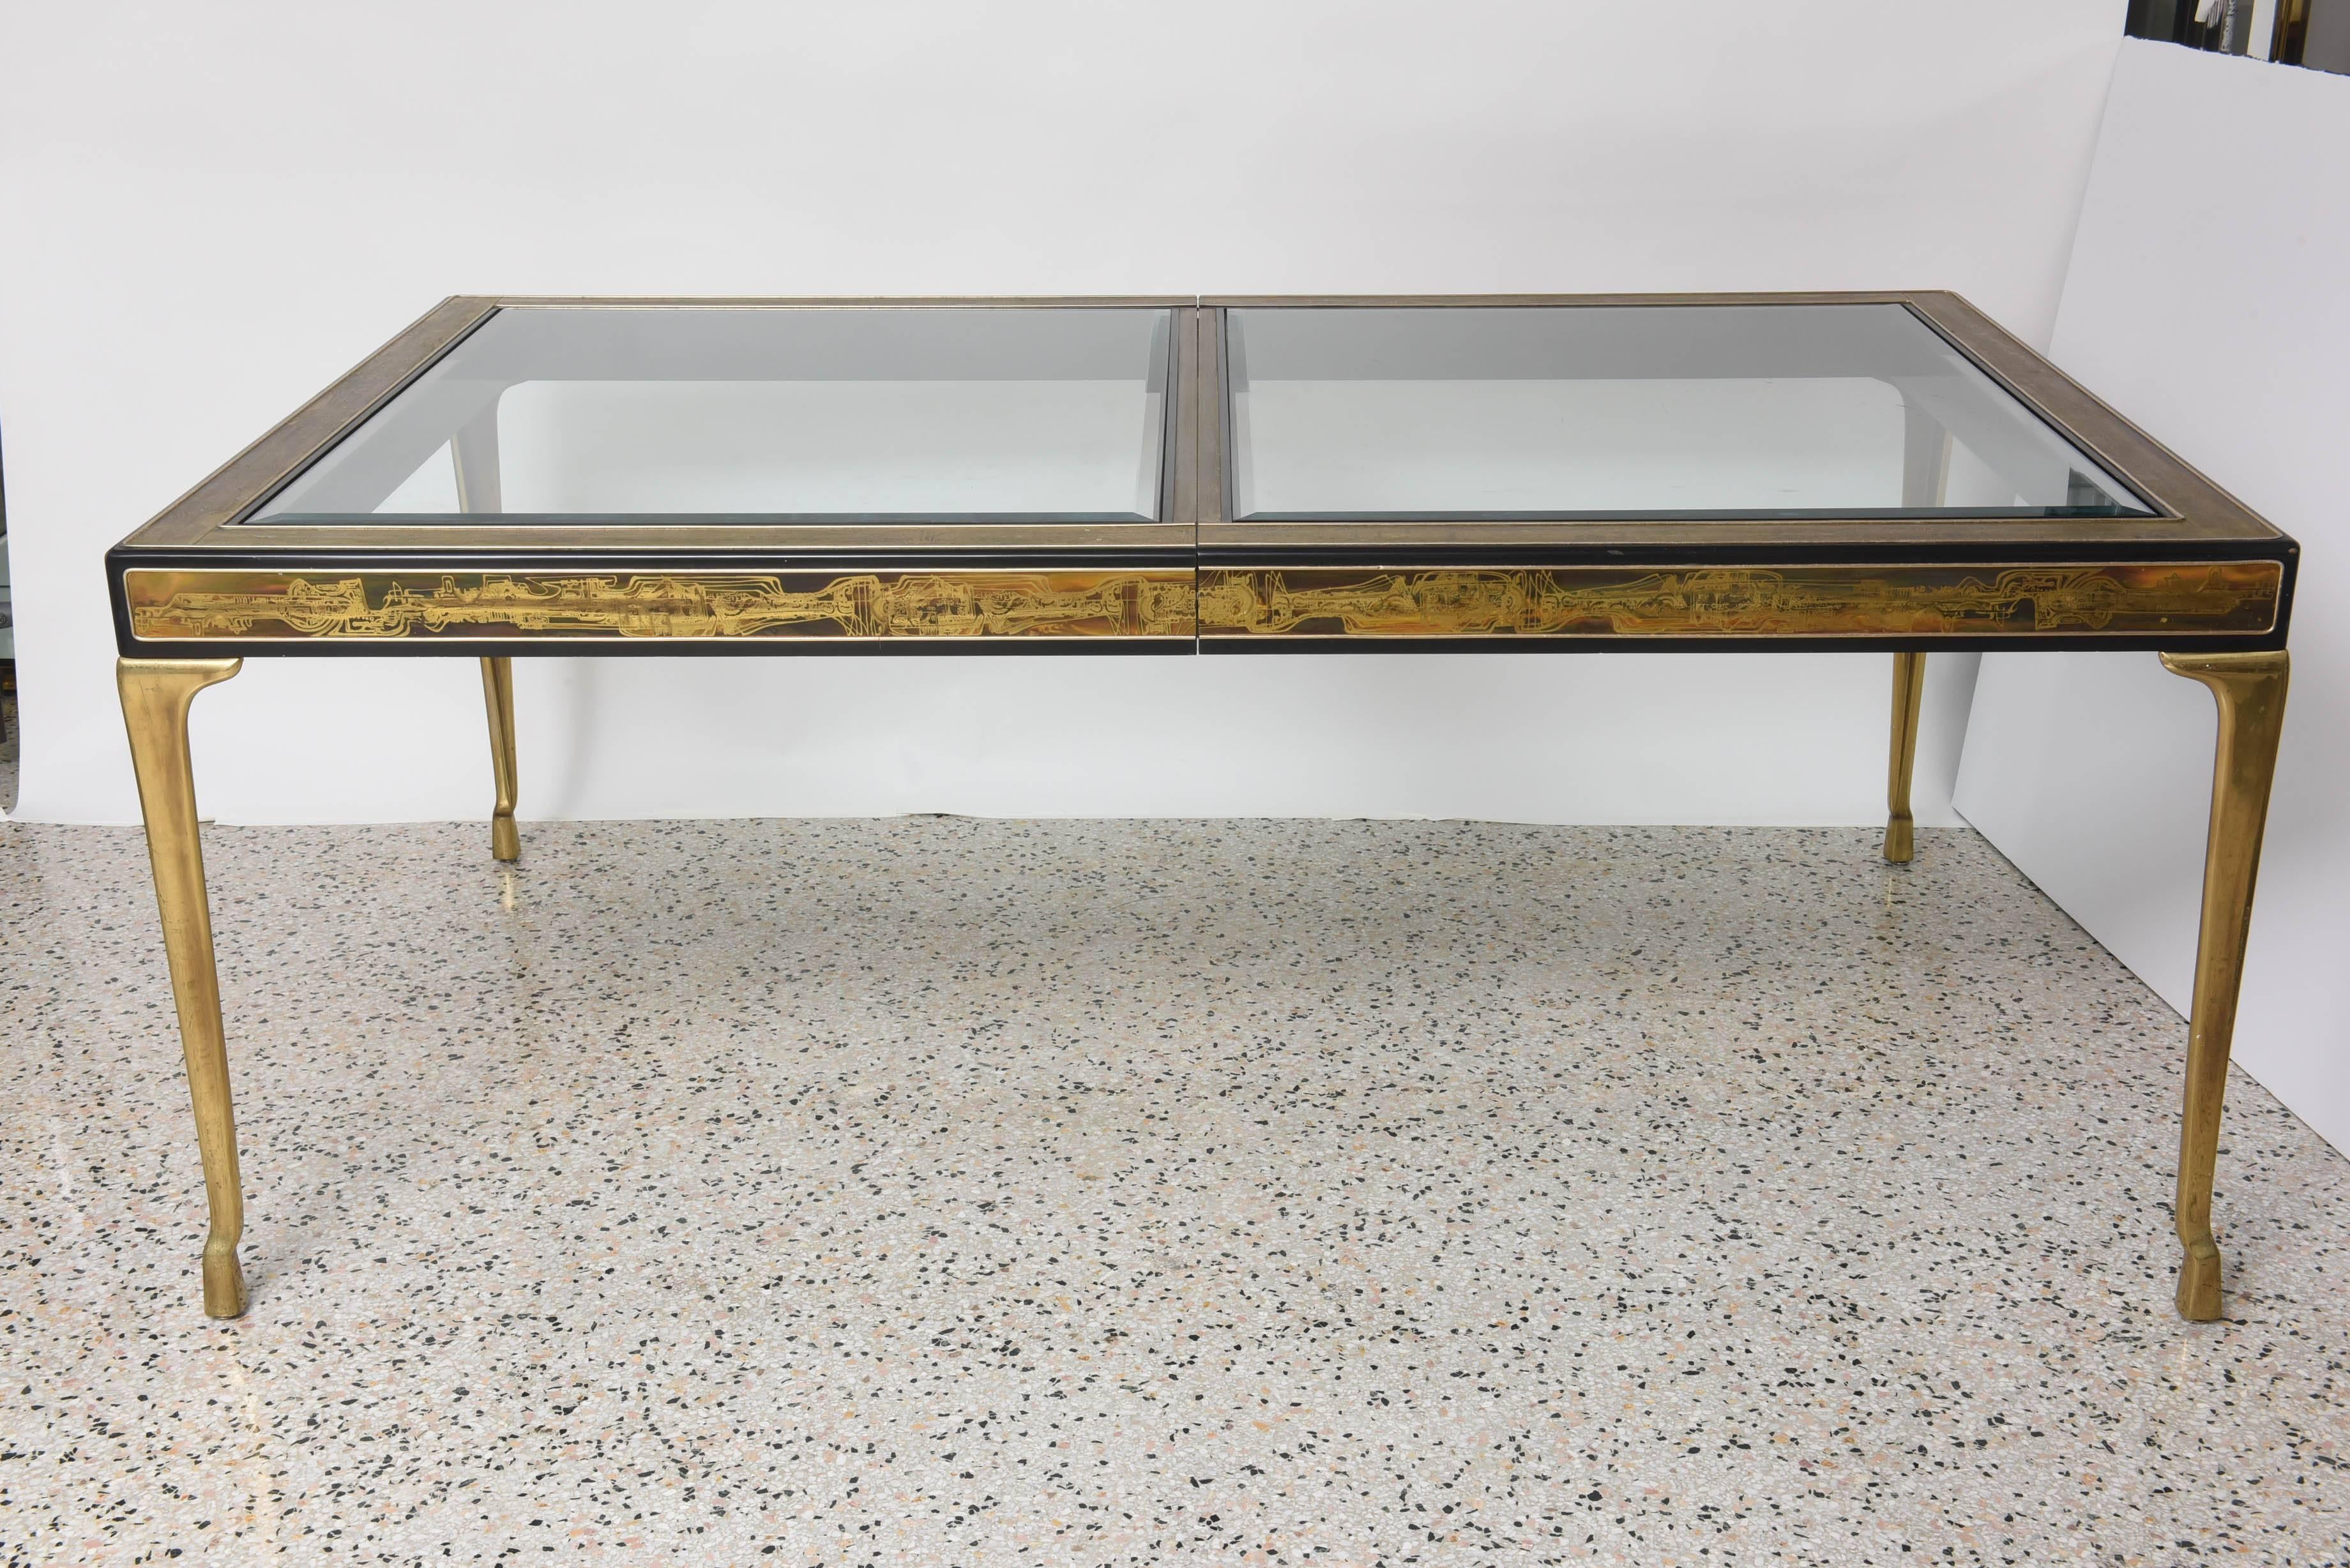 This beautiful American modern dining room table was designed by the iconic furniture designer Bernhard Rohne and was manufactured by Mastercraft furniture in the 1970s. The piece has cast brass legs with stylized doe hooves and a black-lacquered